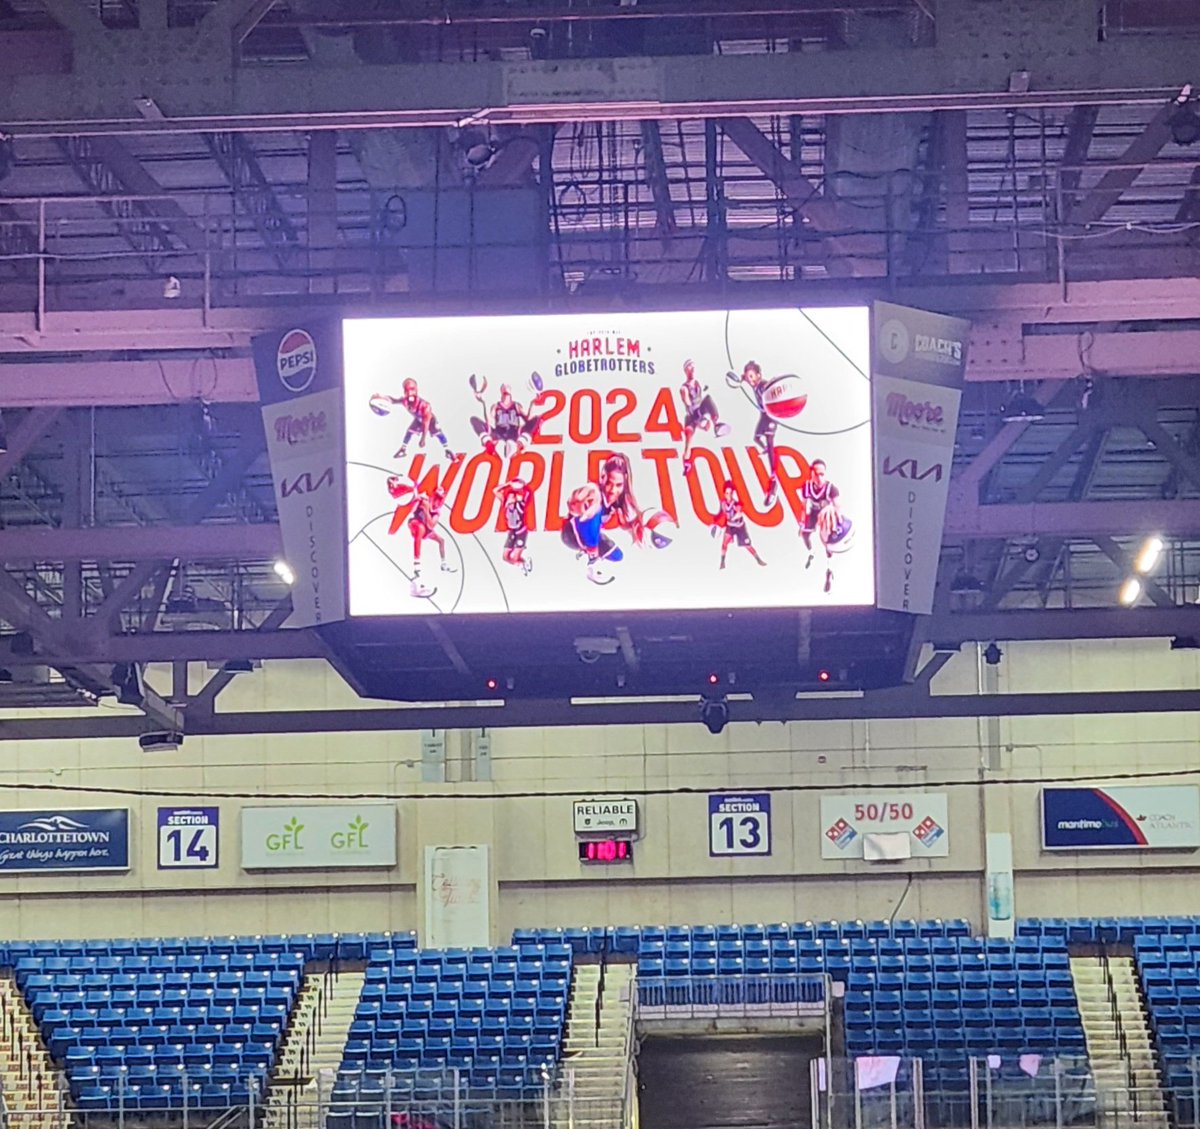 Great seats are still available for the @Globies World Tour coming May 1st! Tickets are available at the box office by calling 902-629-6625 or online at eastlinkcentrepei.com